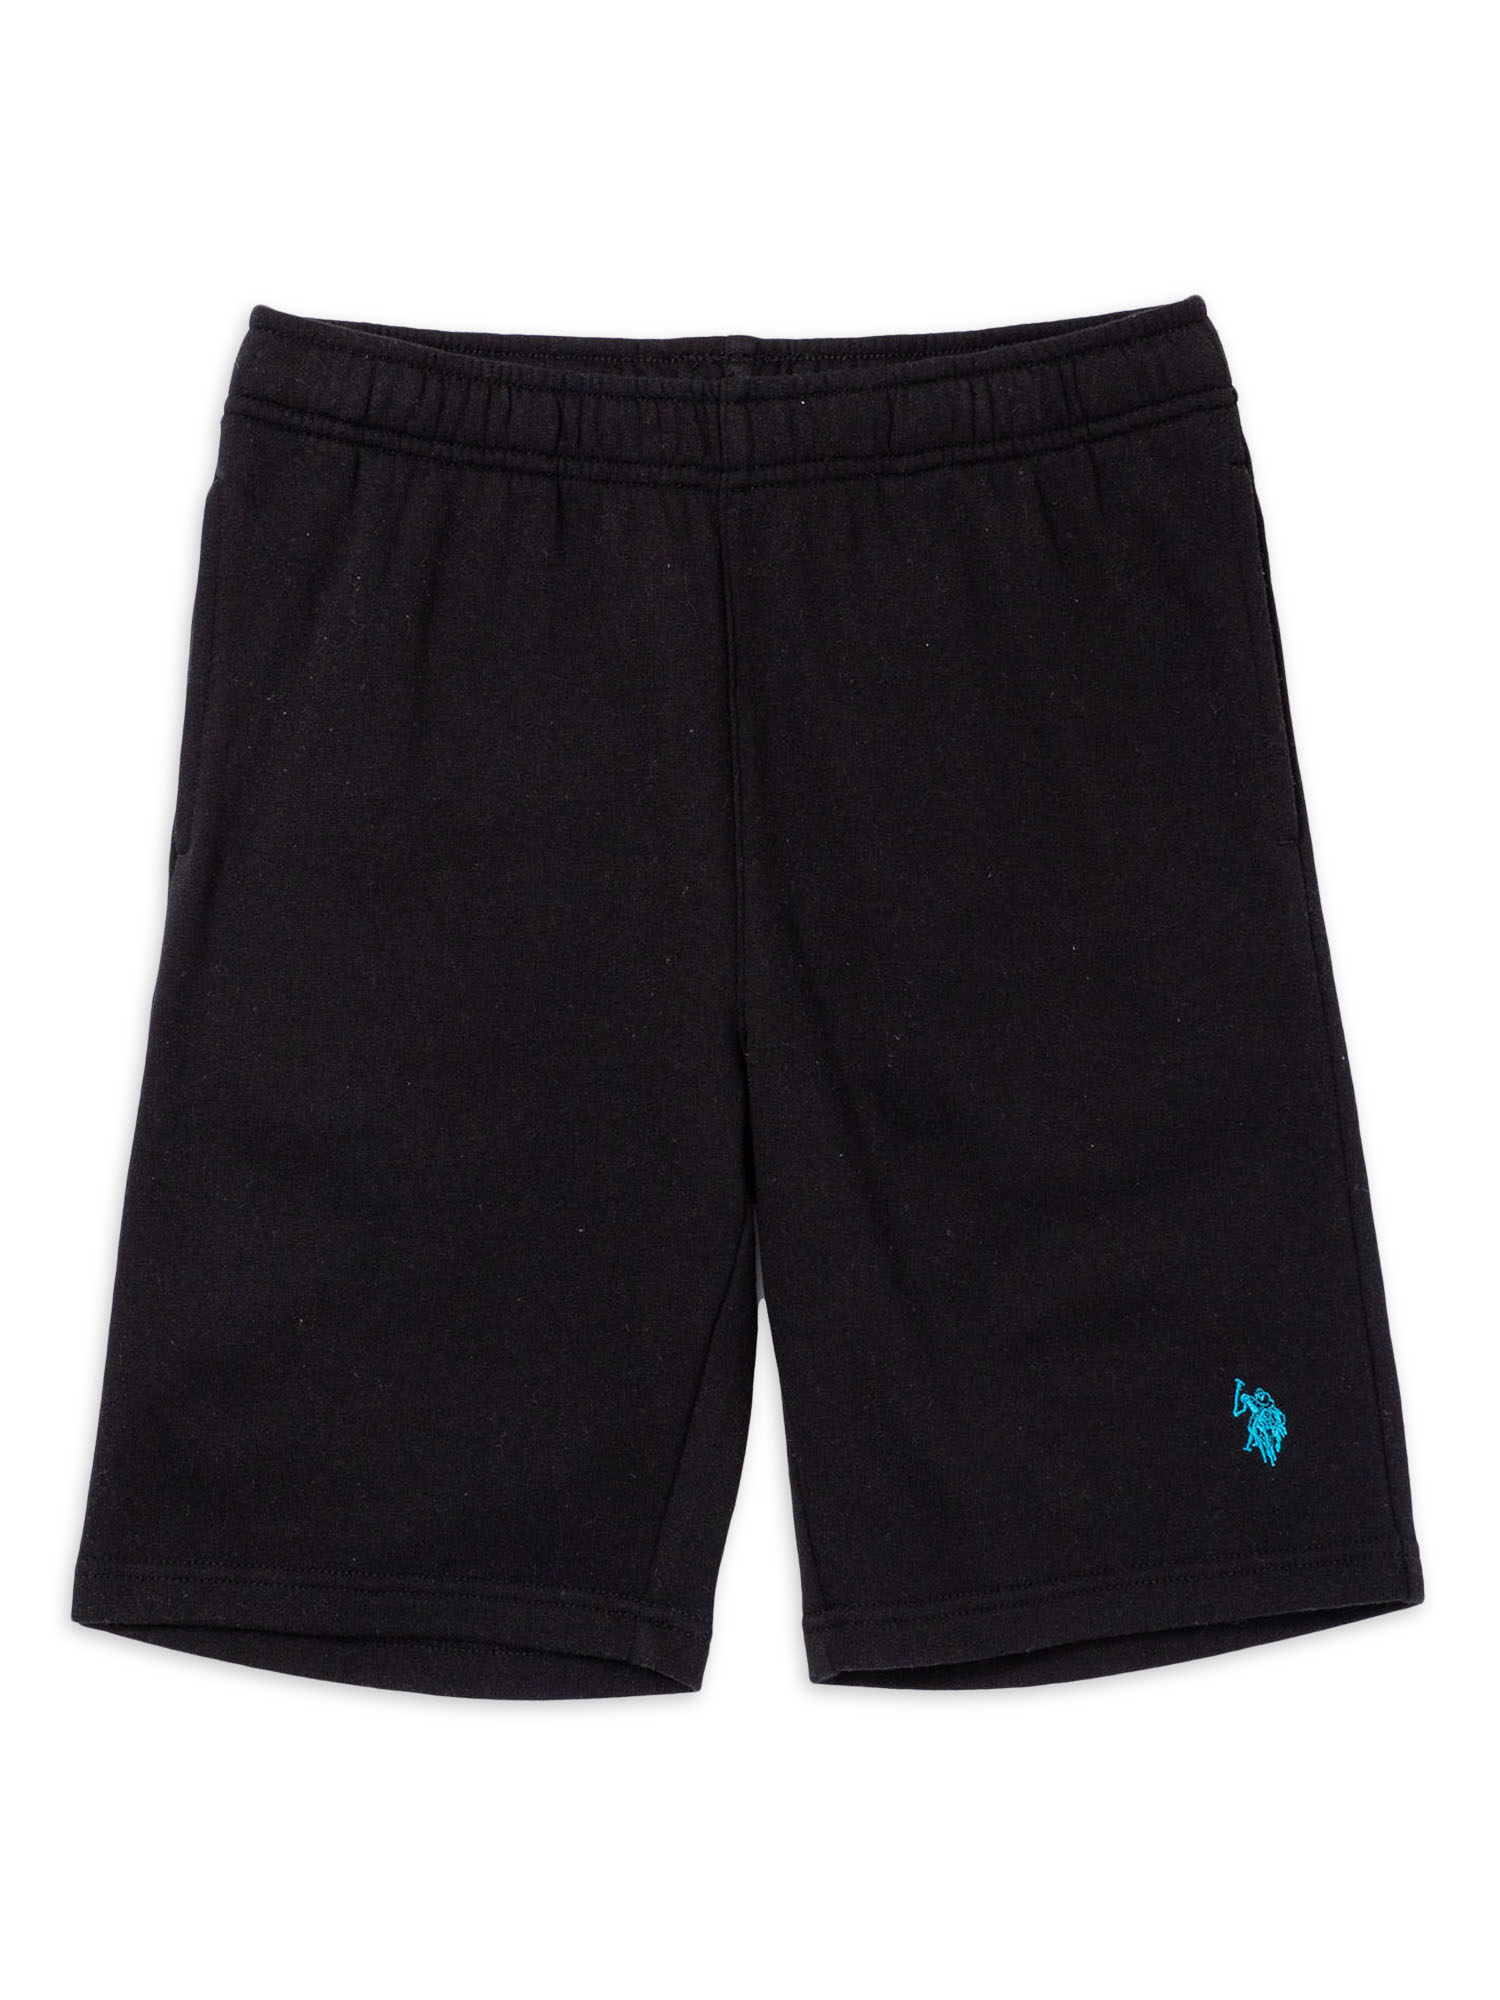 U.S Polo Assn. Performance Fleece 2-Pack Shorts, Sizes 4-18 - image 2 of 5